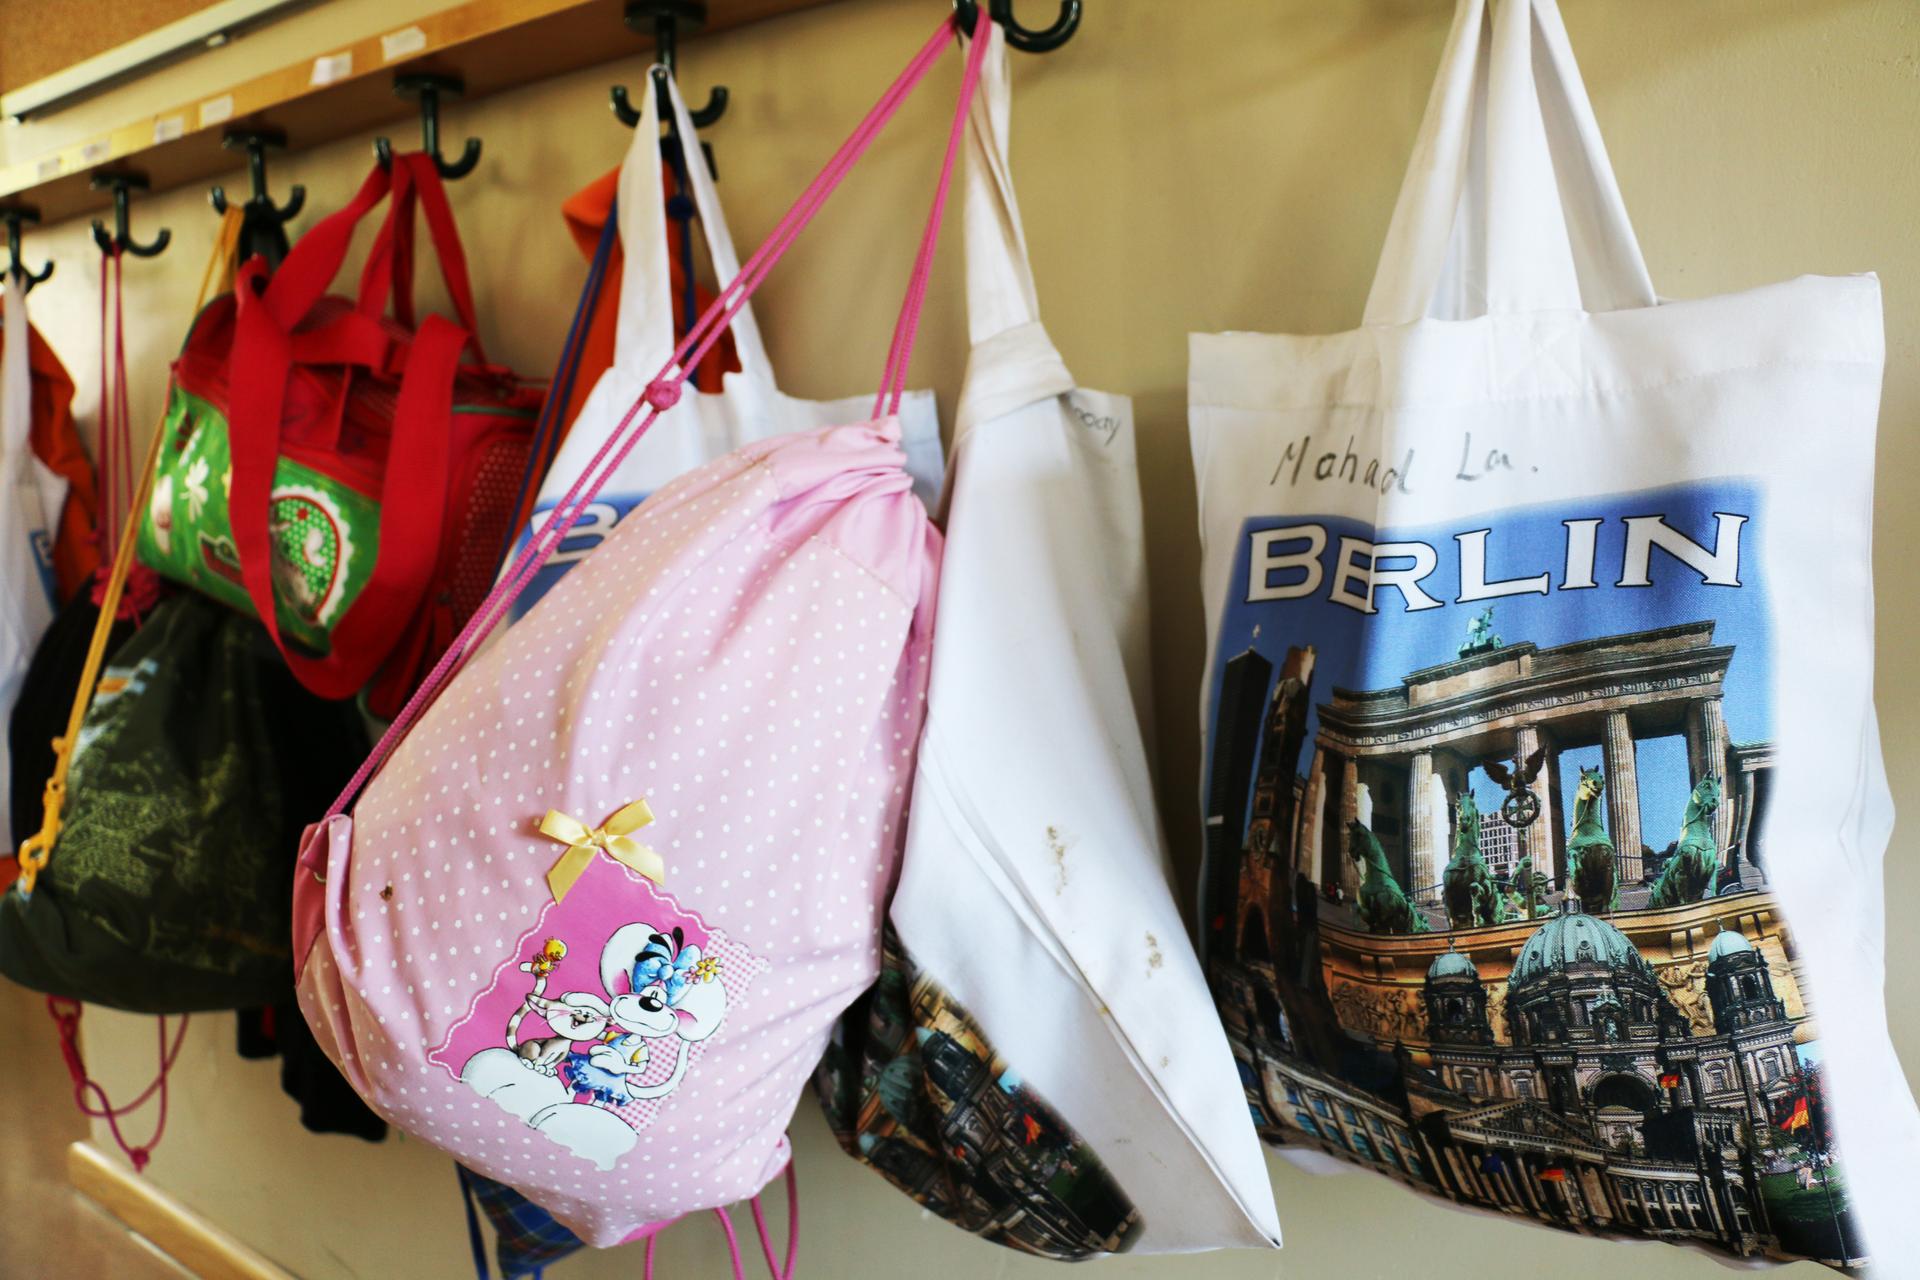 A row of colorful bags hangs on the back wall of the classroom.